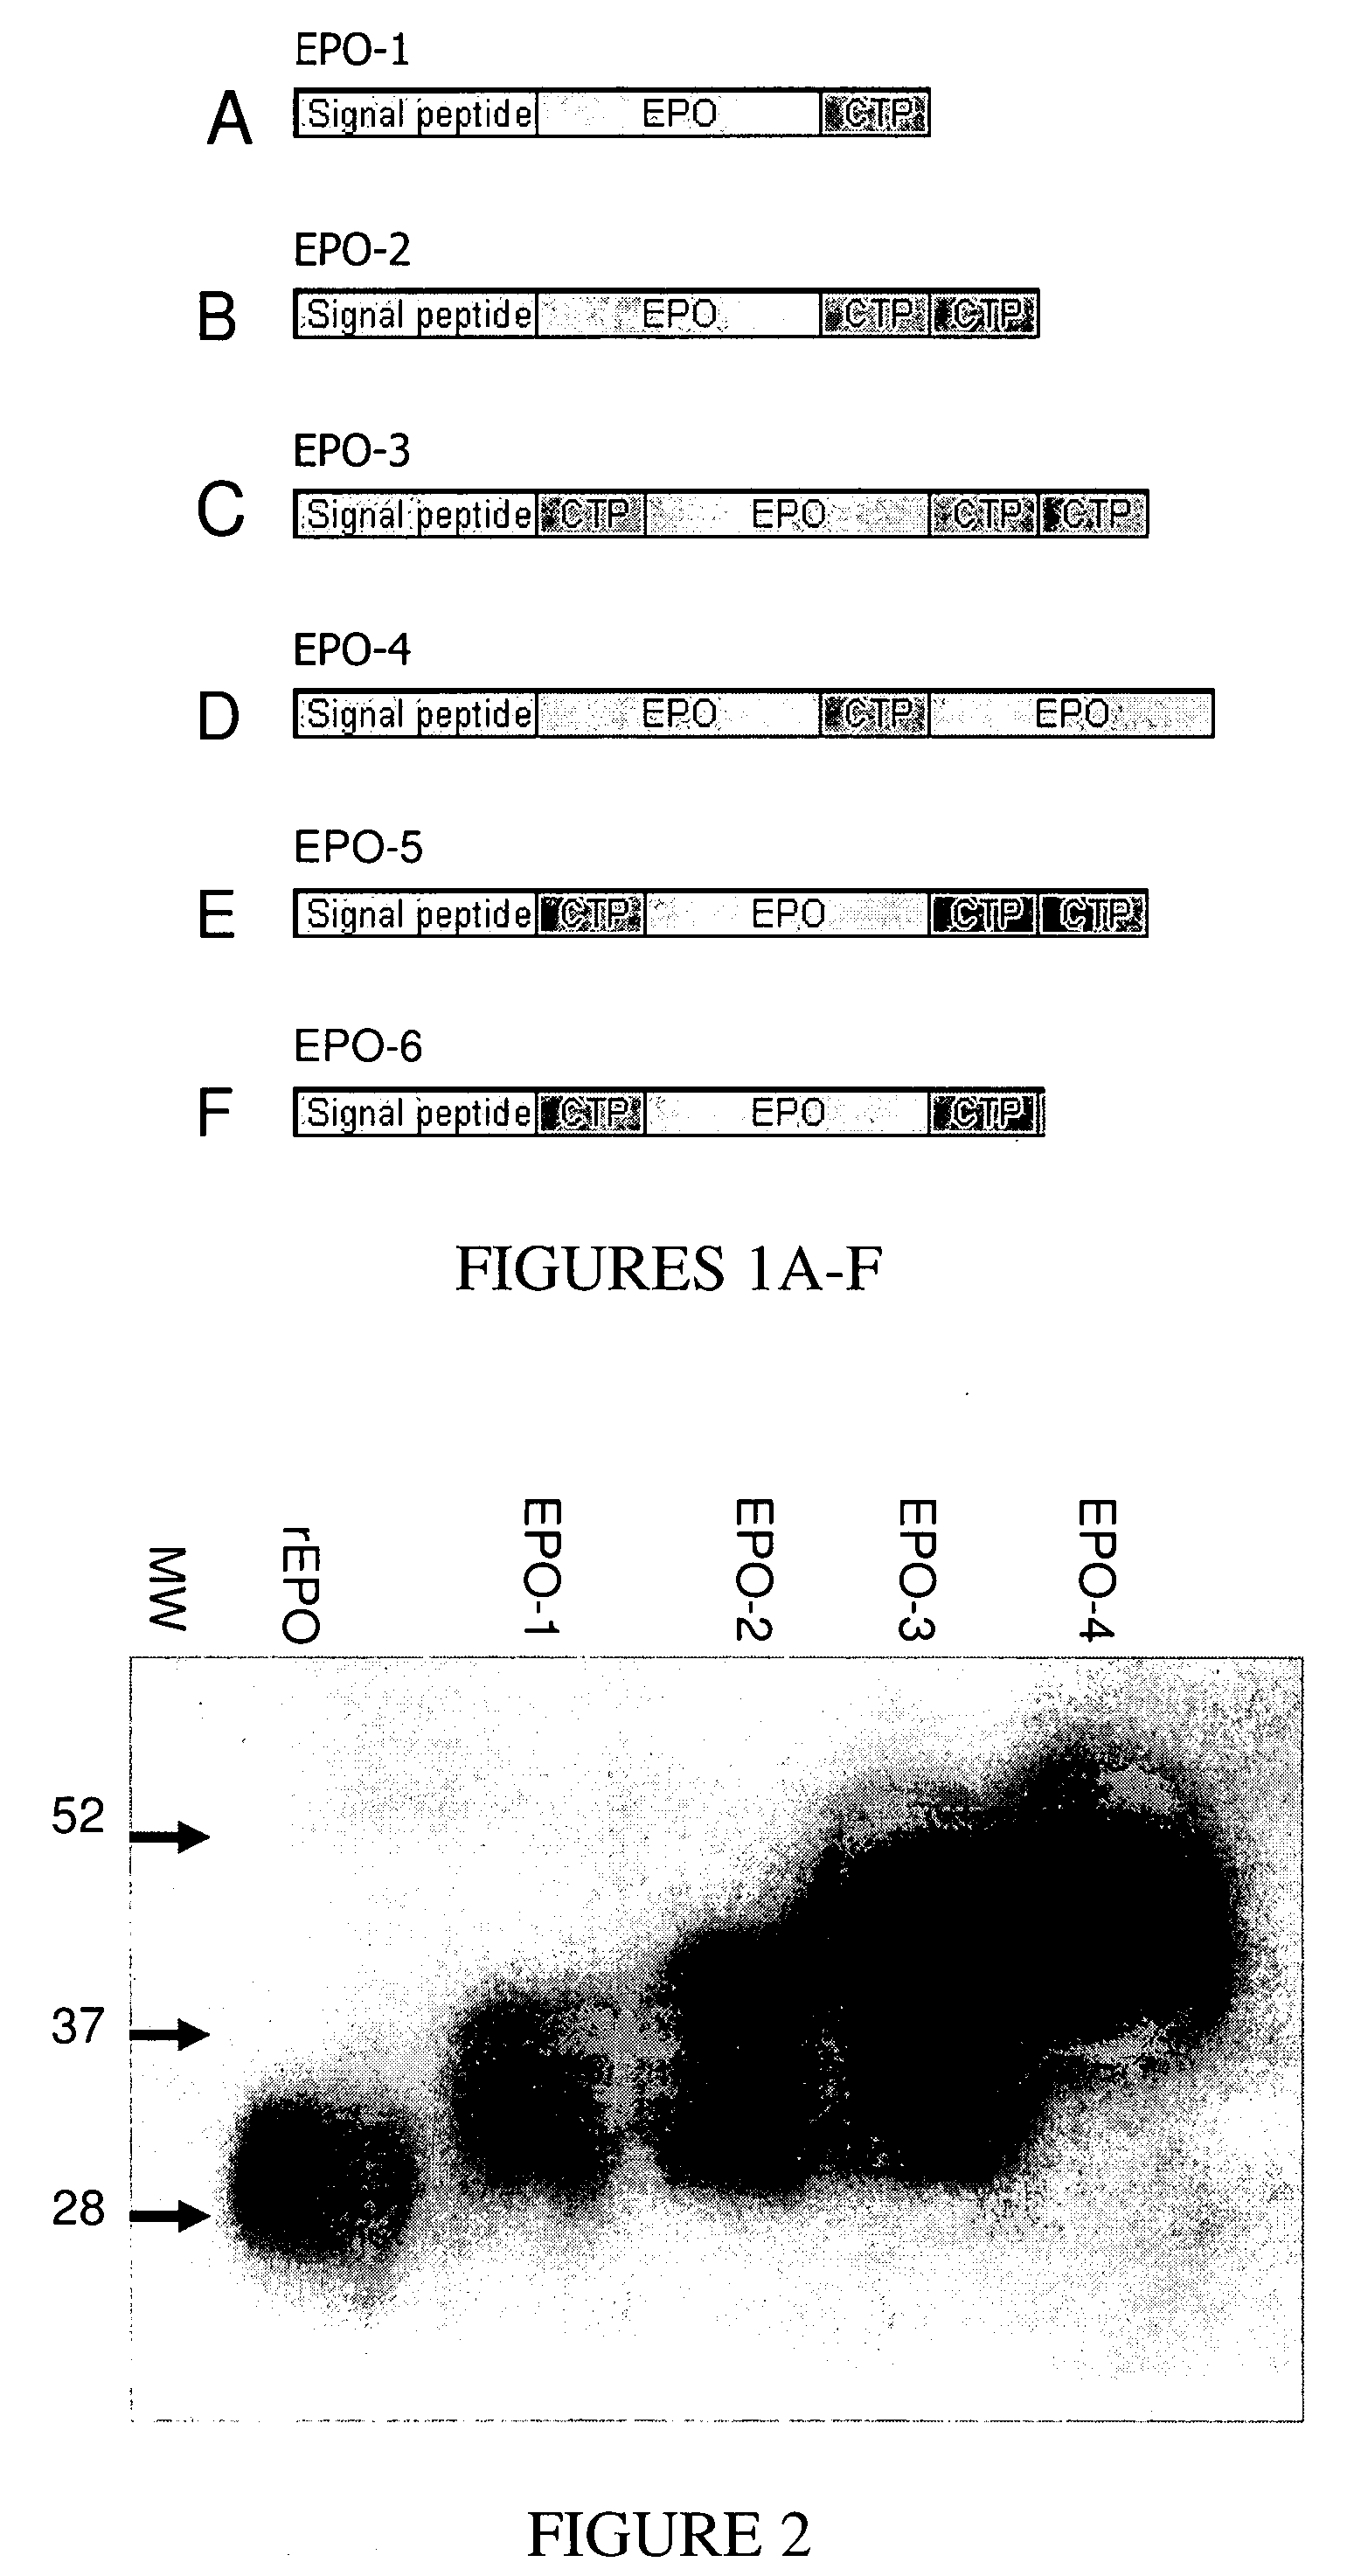 Long-acting EPO polypeptides and derivatives thereof and methods thereof